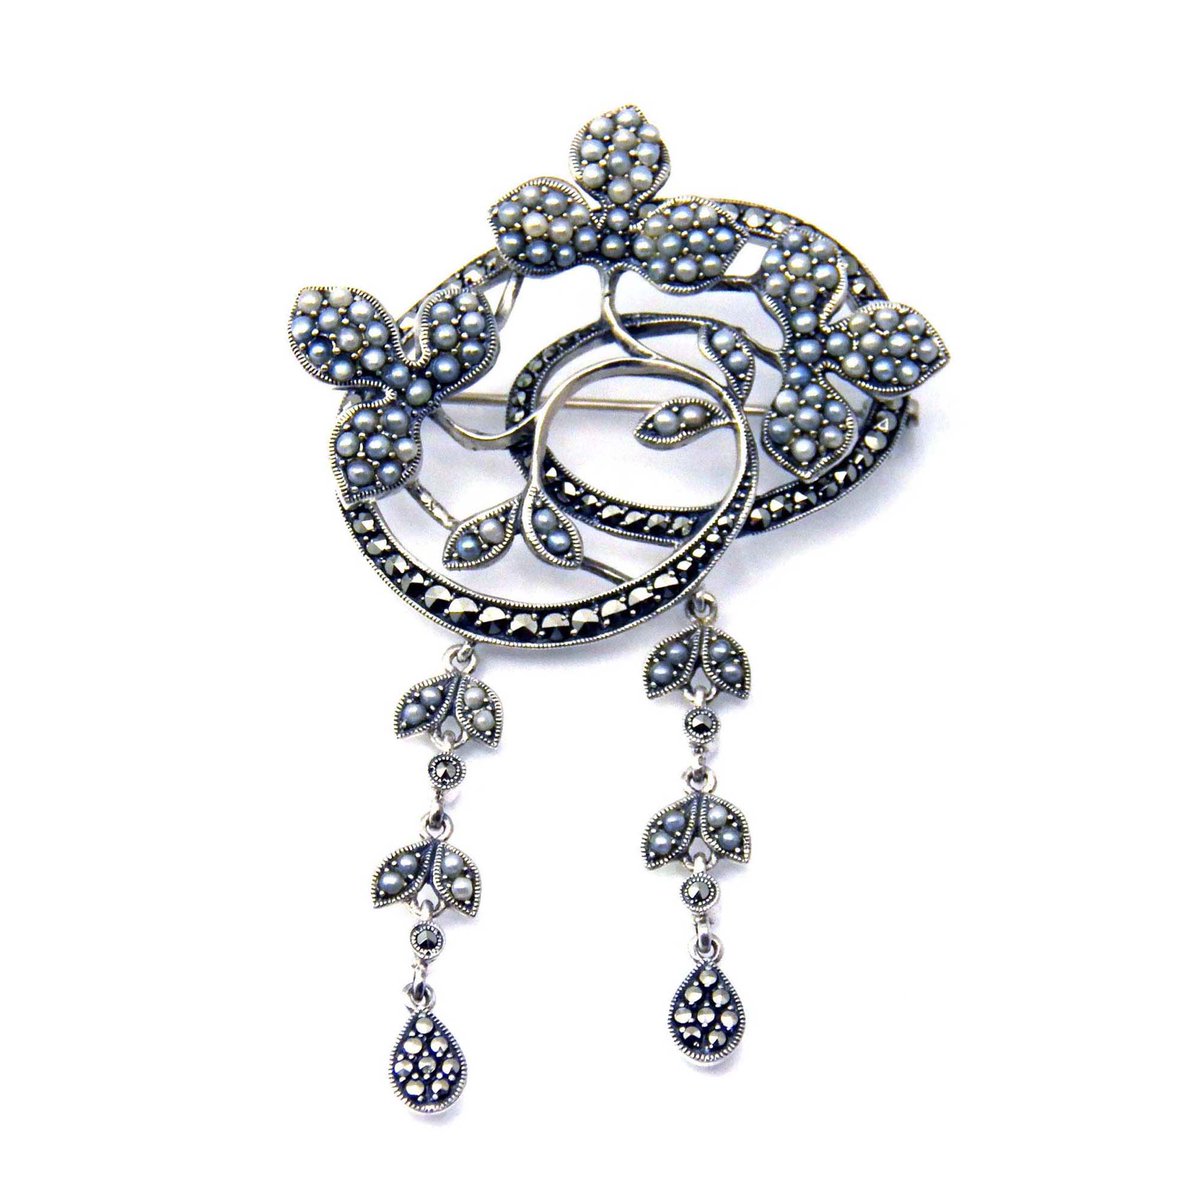 sochicfinds.com/products/marca…
Victorian Revival 925 Silver Marcasite and Seed Pearl Brooch #VictorianRevival #925SilverBrooch #MarcasiteBrooch  #SeedPearlBrooch